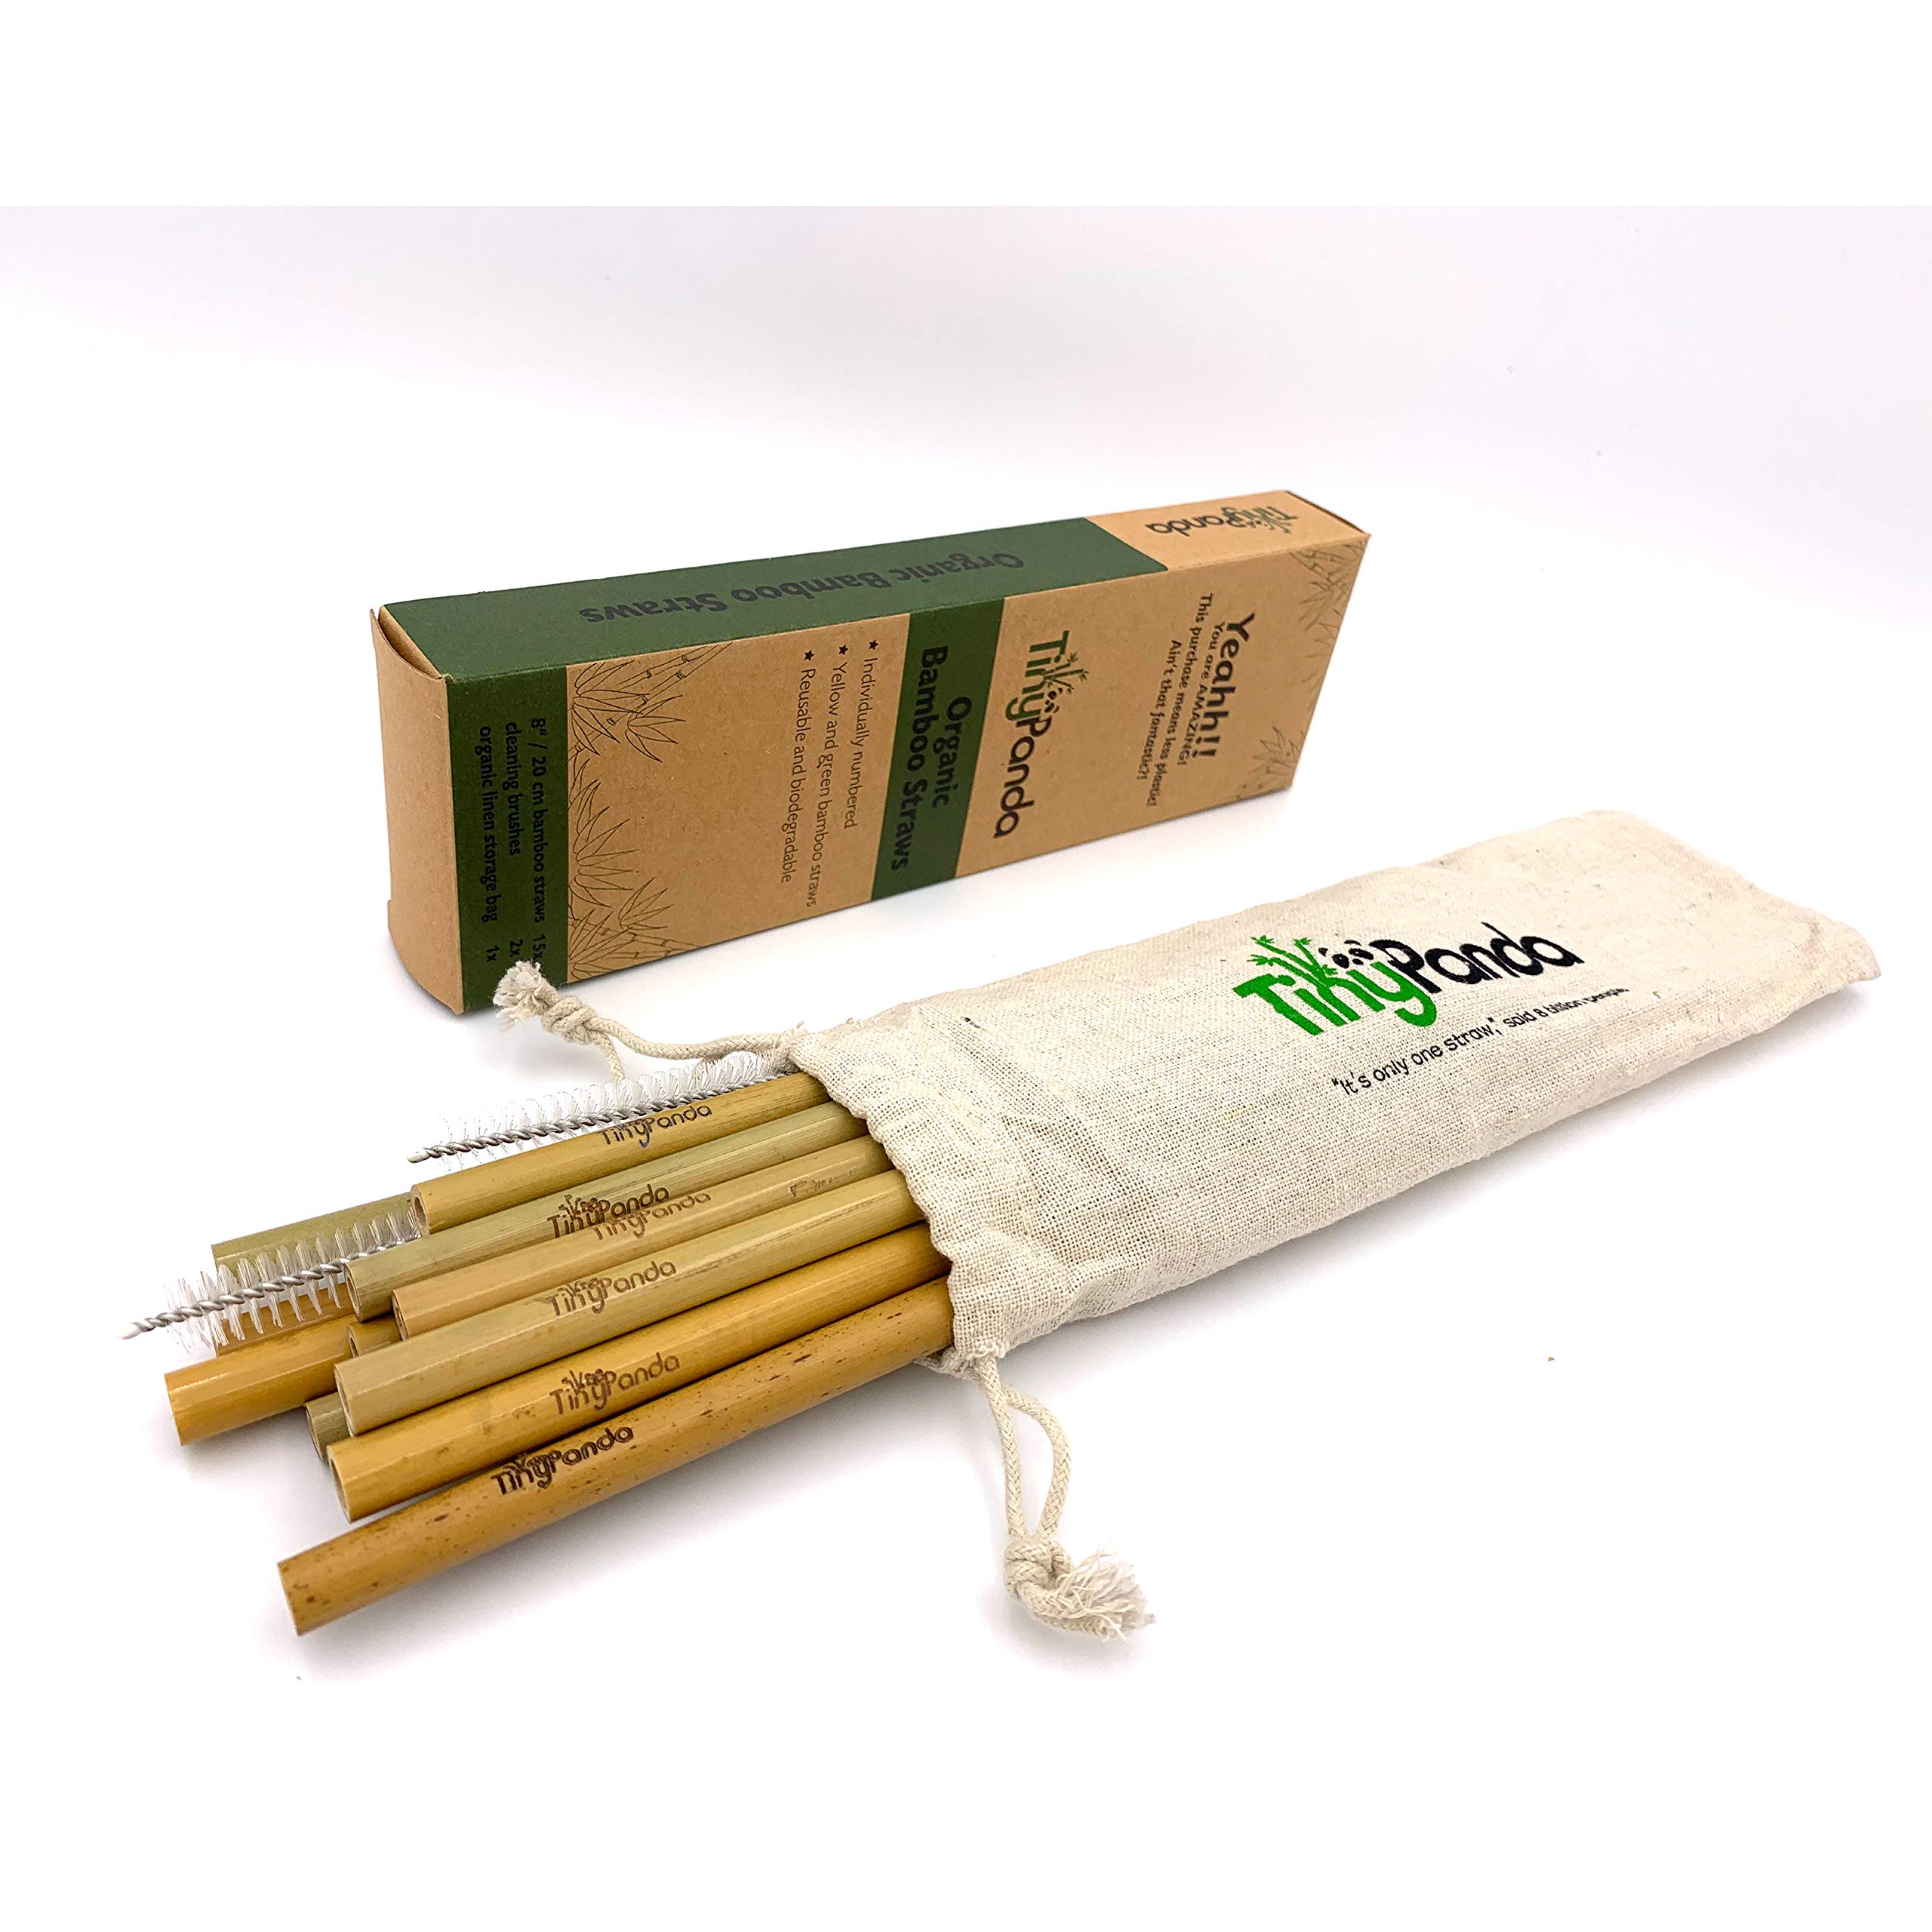 Reusable Bamboo Drinking Straws - Natural Organic Ecofriendly Straws - Set of 15 Straws - Strong and Durable - Including Travel/Storage Pouch - Tiny Panda